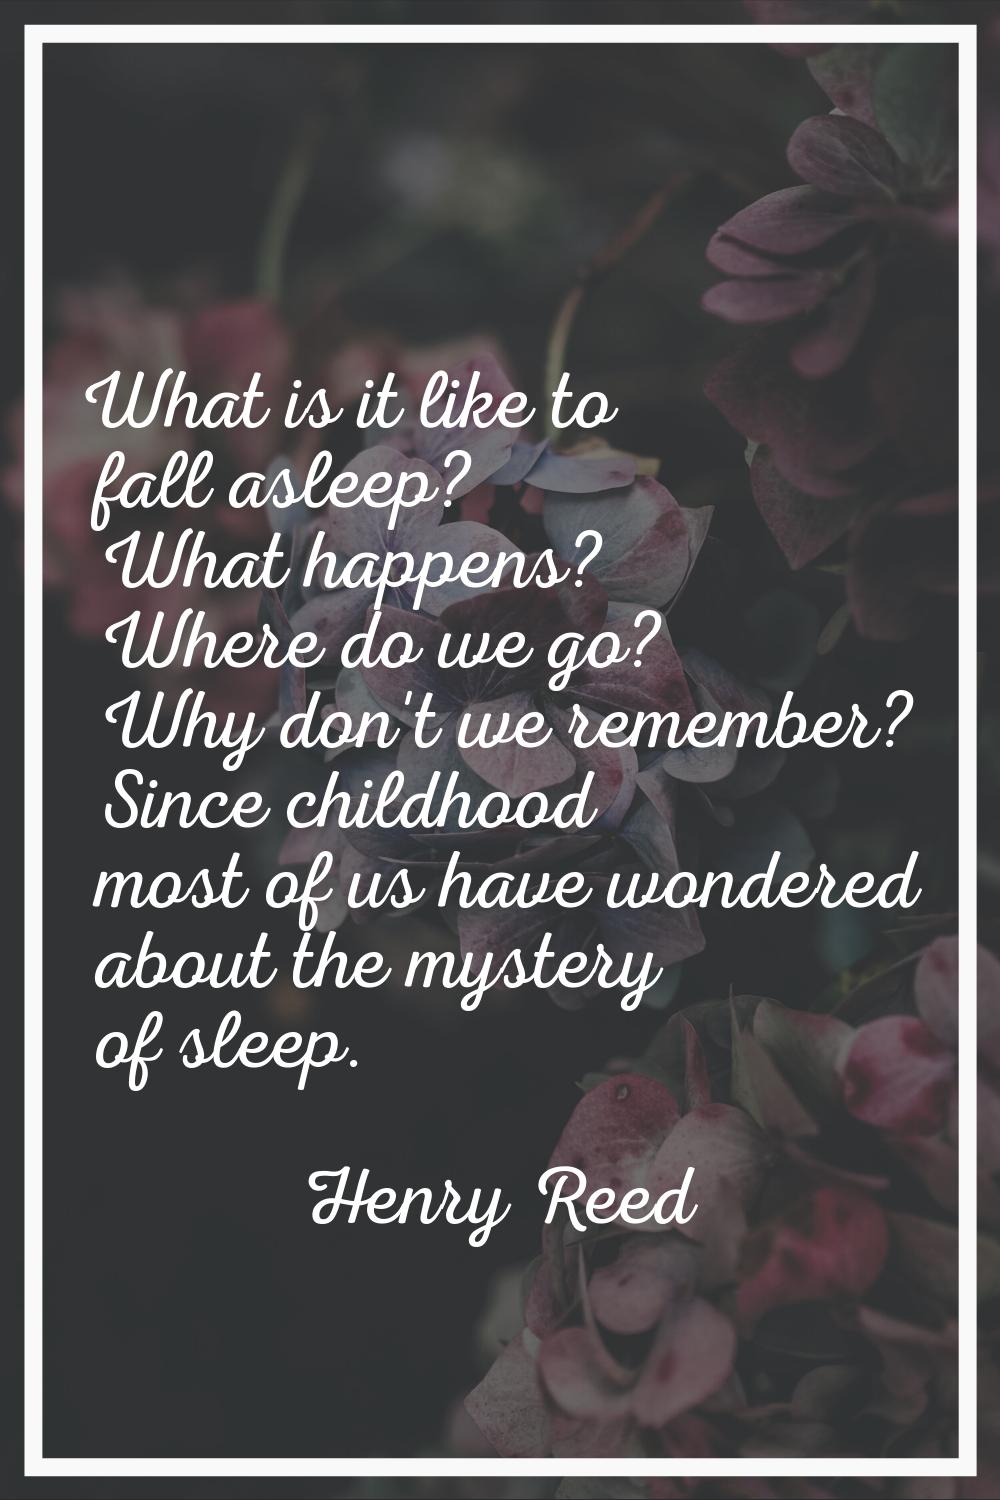 What is it like to fall asleep? What happens? Where do we go? Why don't we remember? Since childhoo